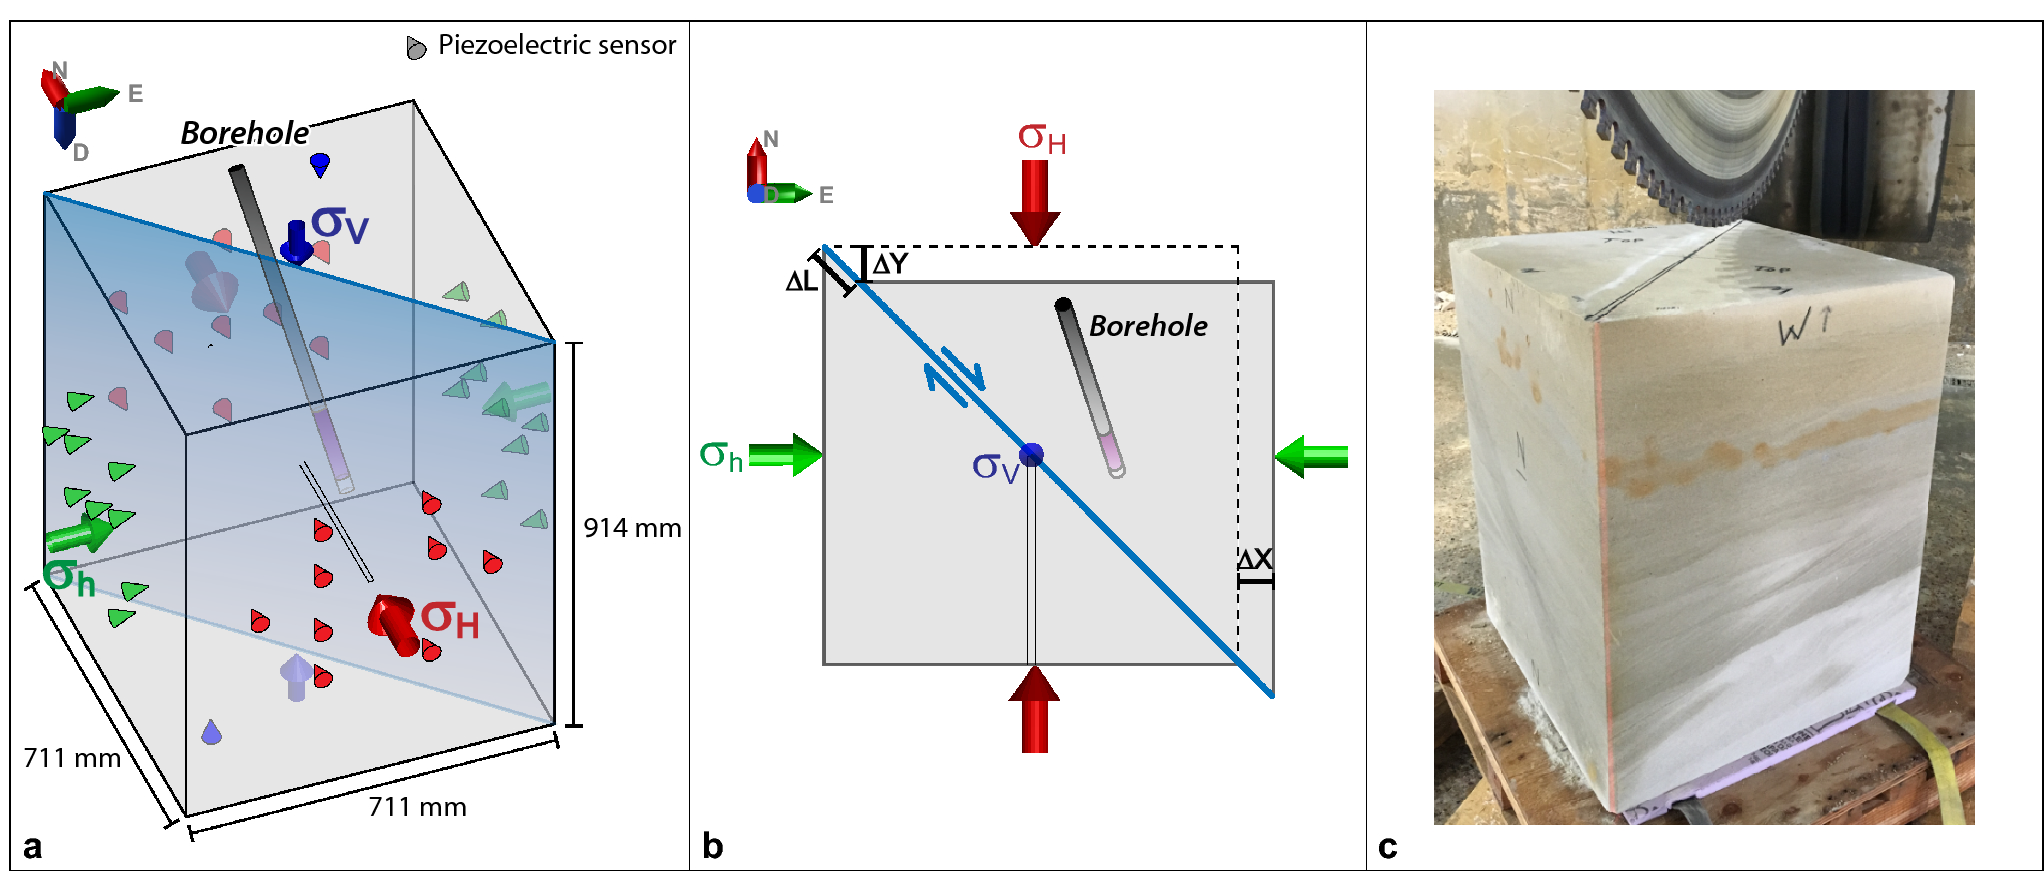 Cubic-meter scale laboratory fault re-activation experiments to improve the  understanding of induced seismicity risks | Scientific Reports